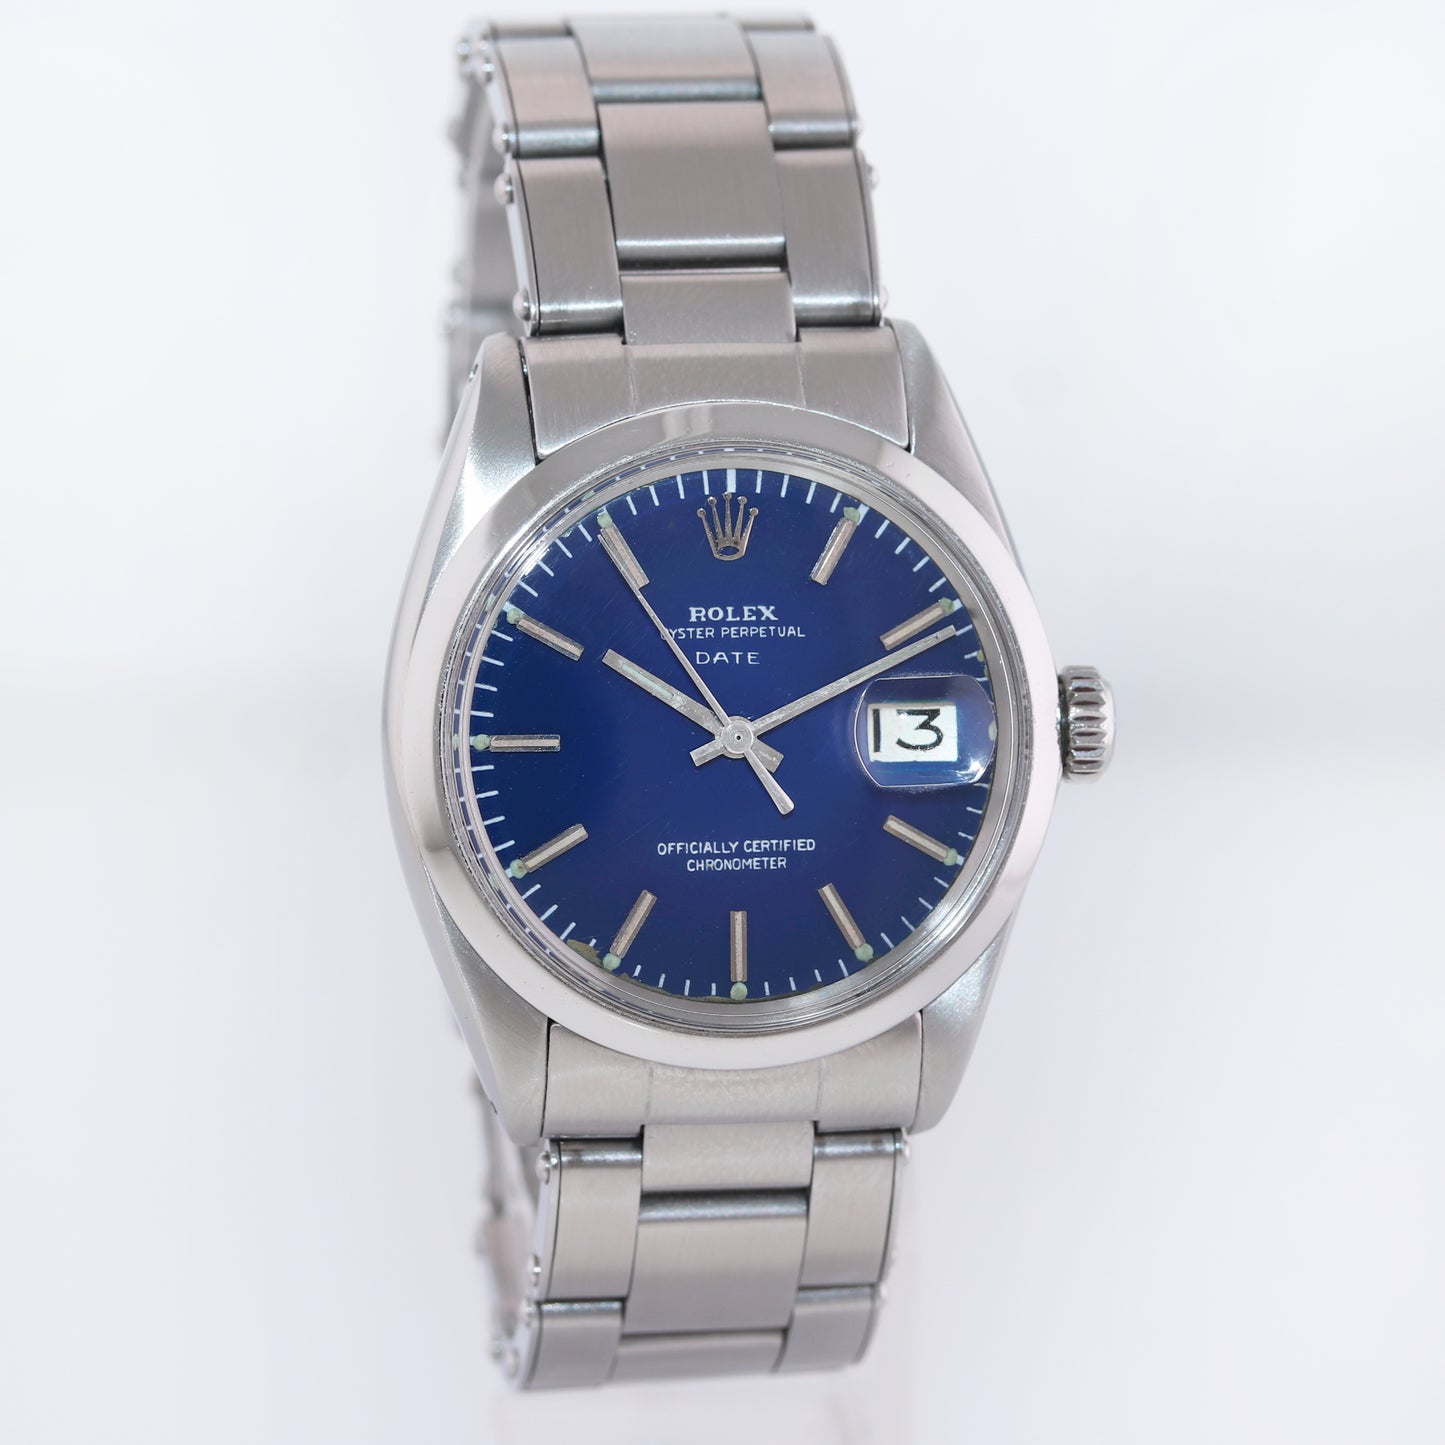 Vintage Rolex Date 1500 Steel Blue Dial 34mm Oyster Perpetual Watch Box